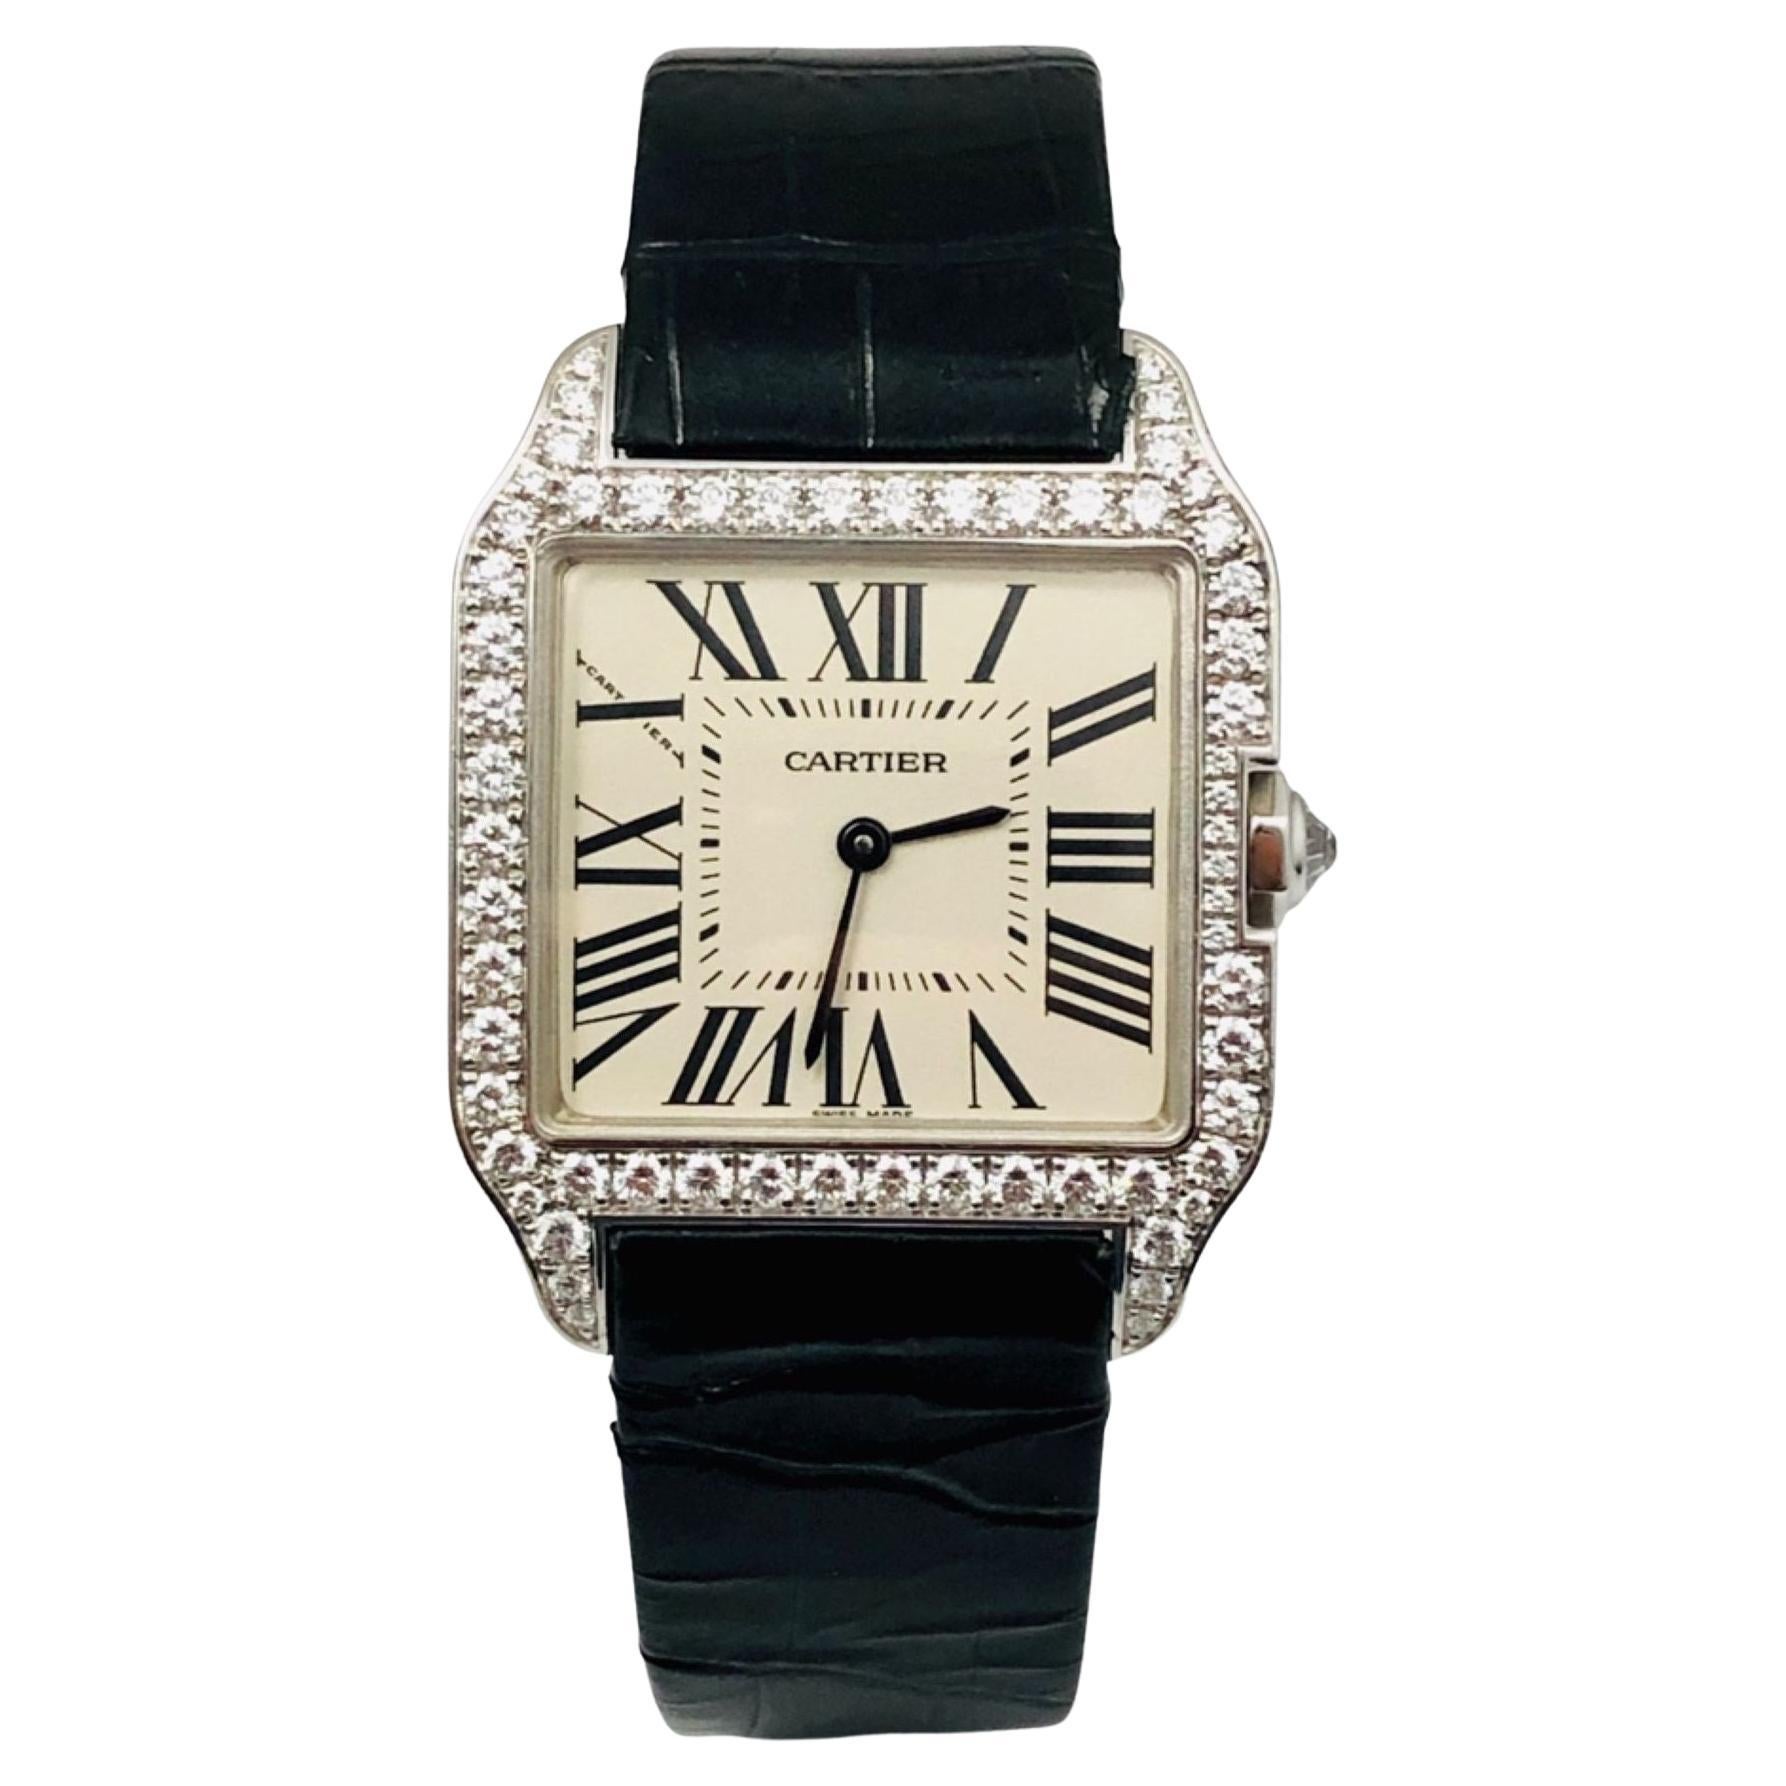 Cartier Santos Dumont in 18k White Gold and Diamonds Ref WH100651